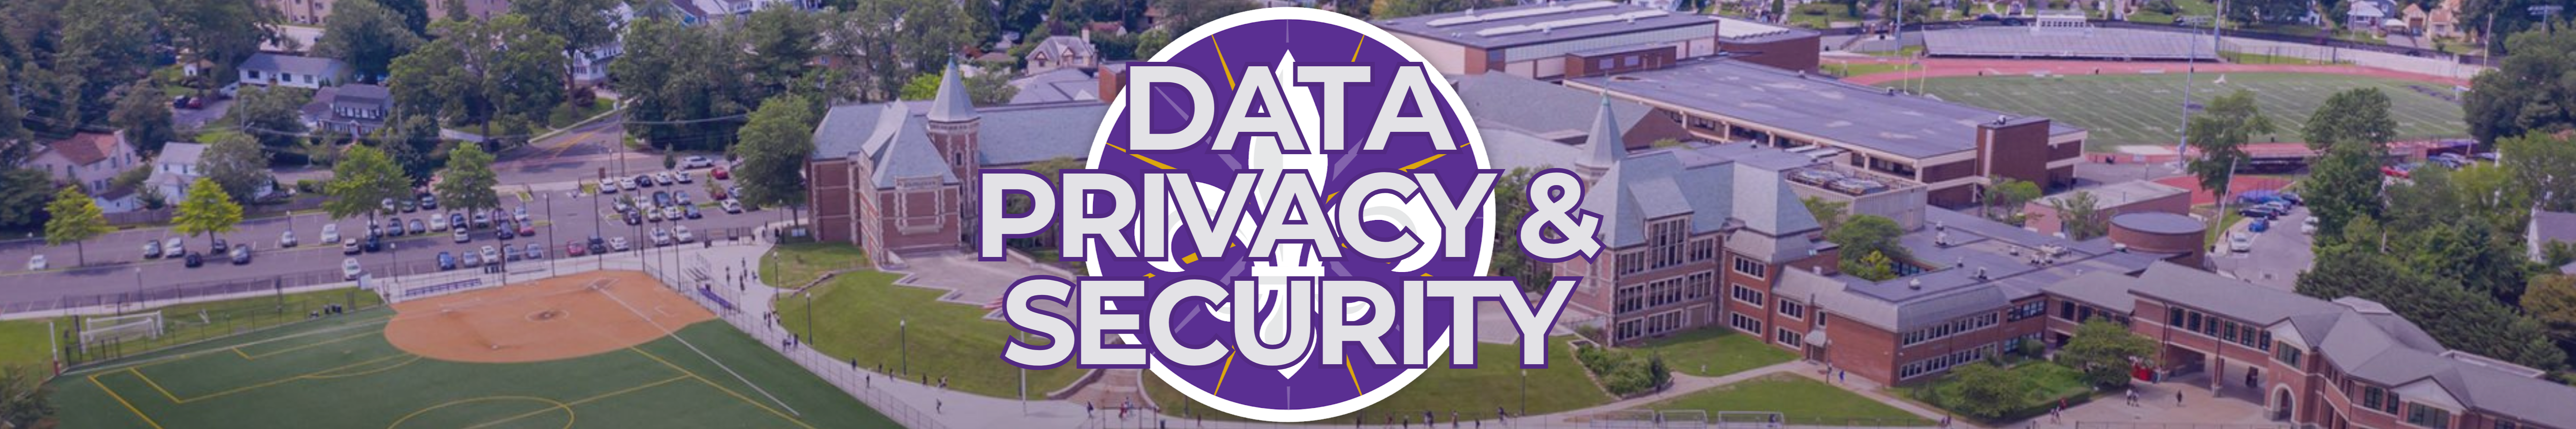 CSDNR Date Privacy and security 